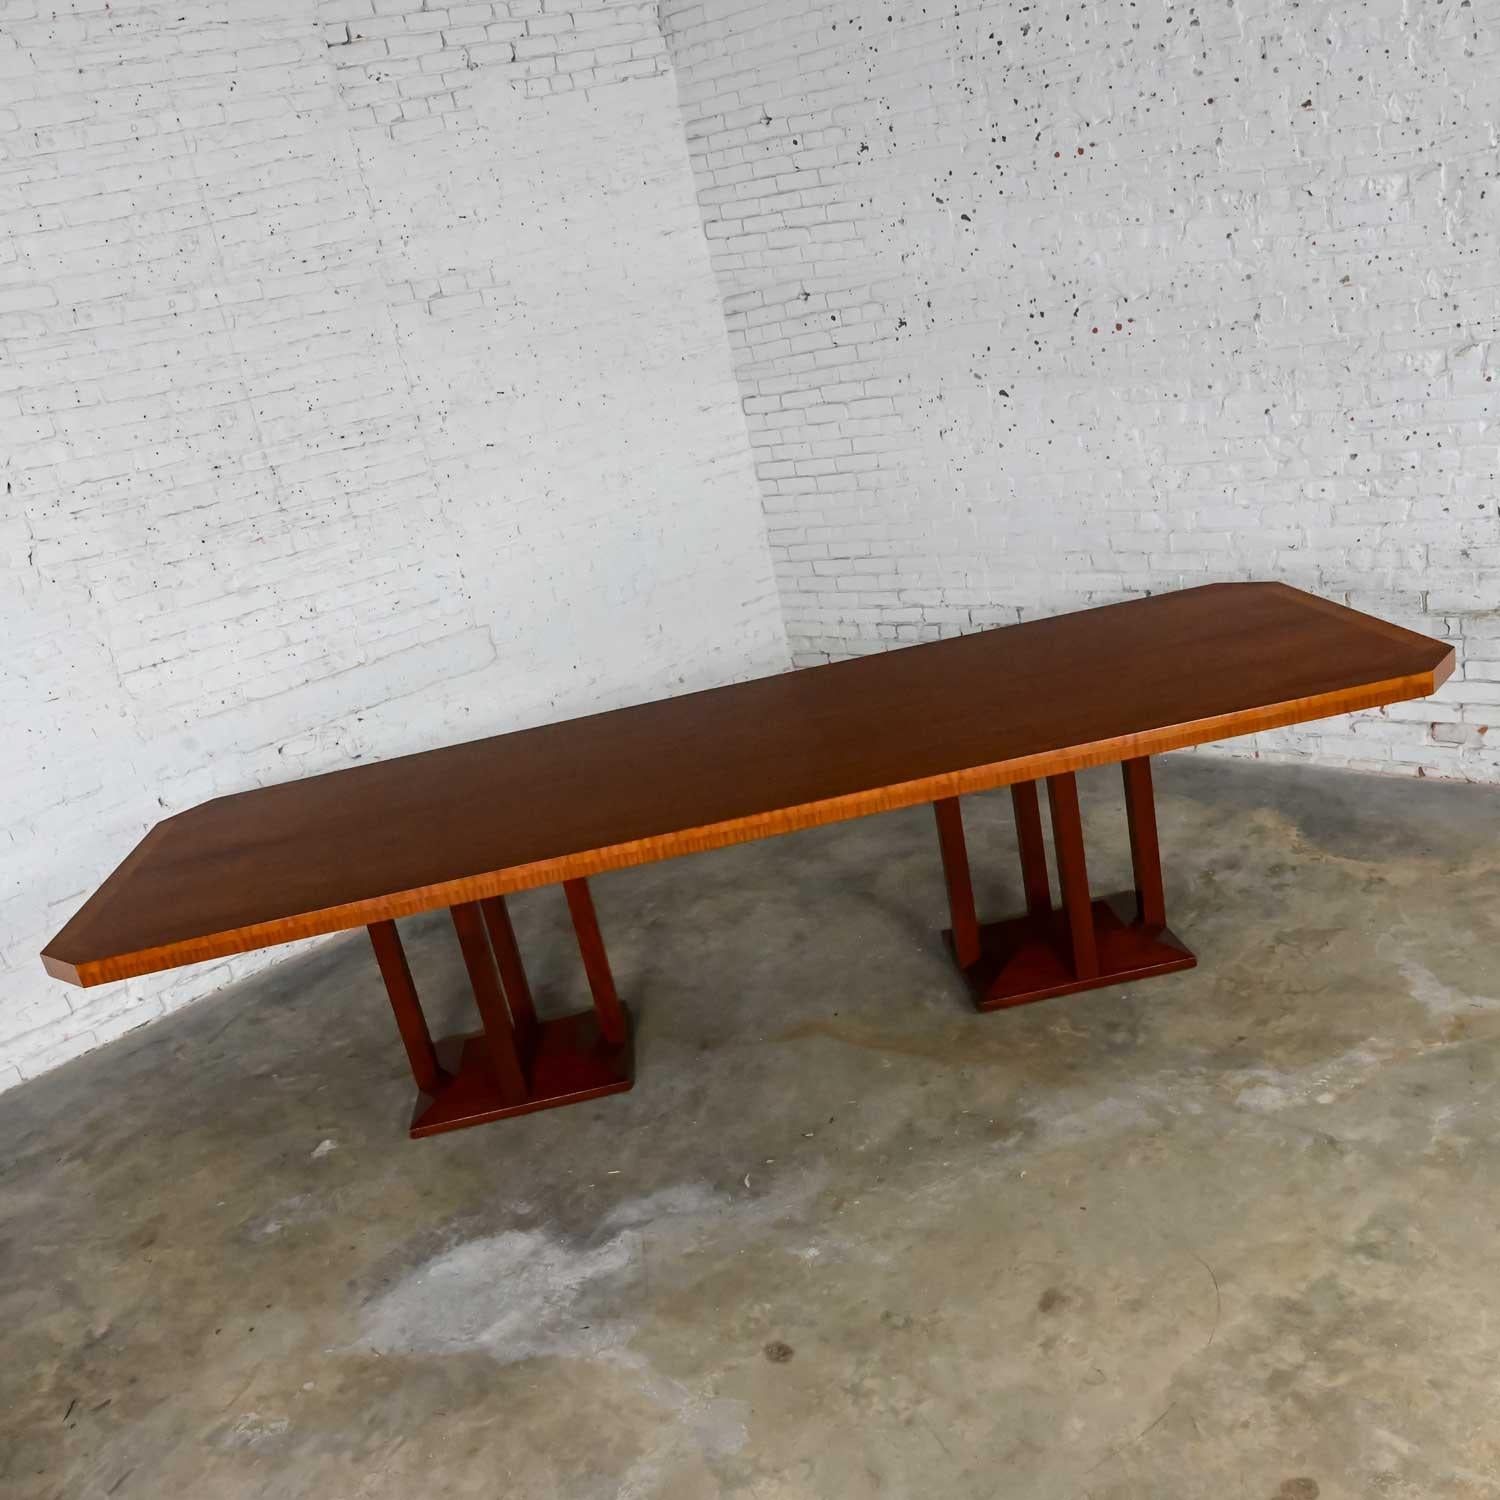 Handsome vintage Art Deco Revival large custom mahogany double pedestal dining or conference table made by Rialto & designed by Zlata Pericic for Meca Design & Production. Beautiful condition, keeping in mind that this is vintage and not new so will